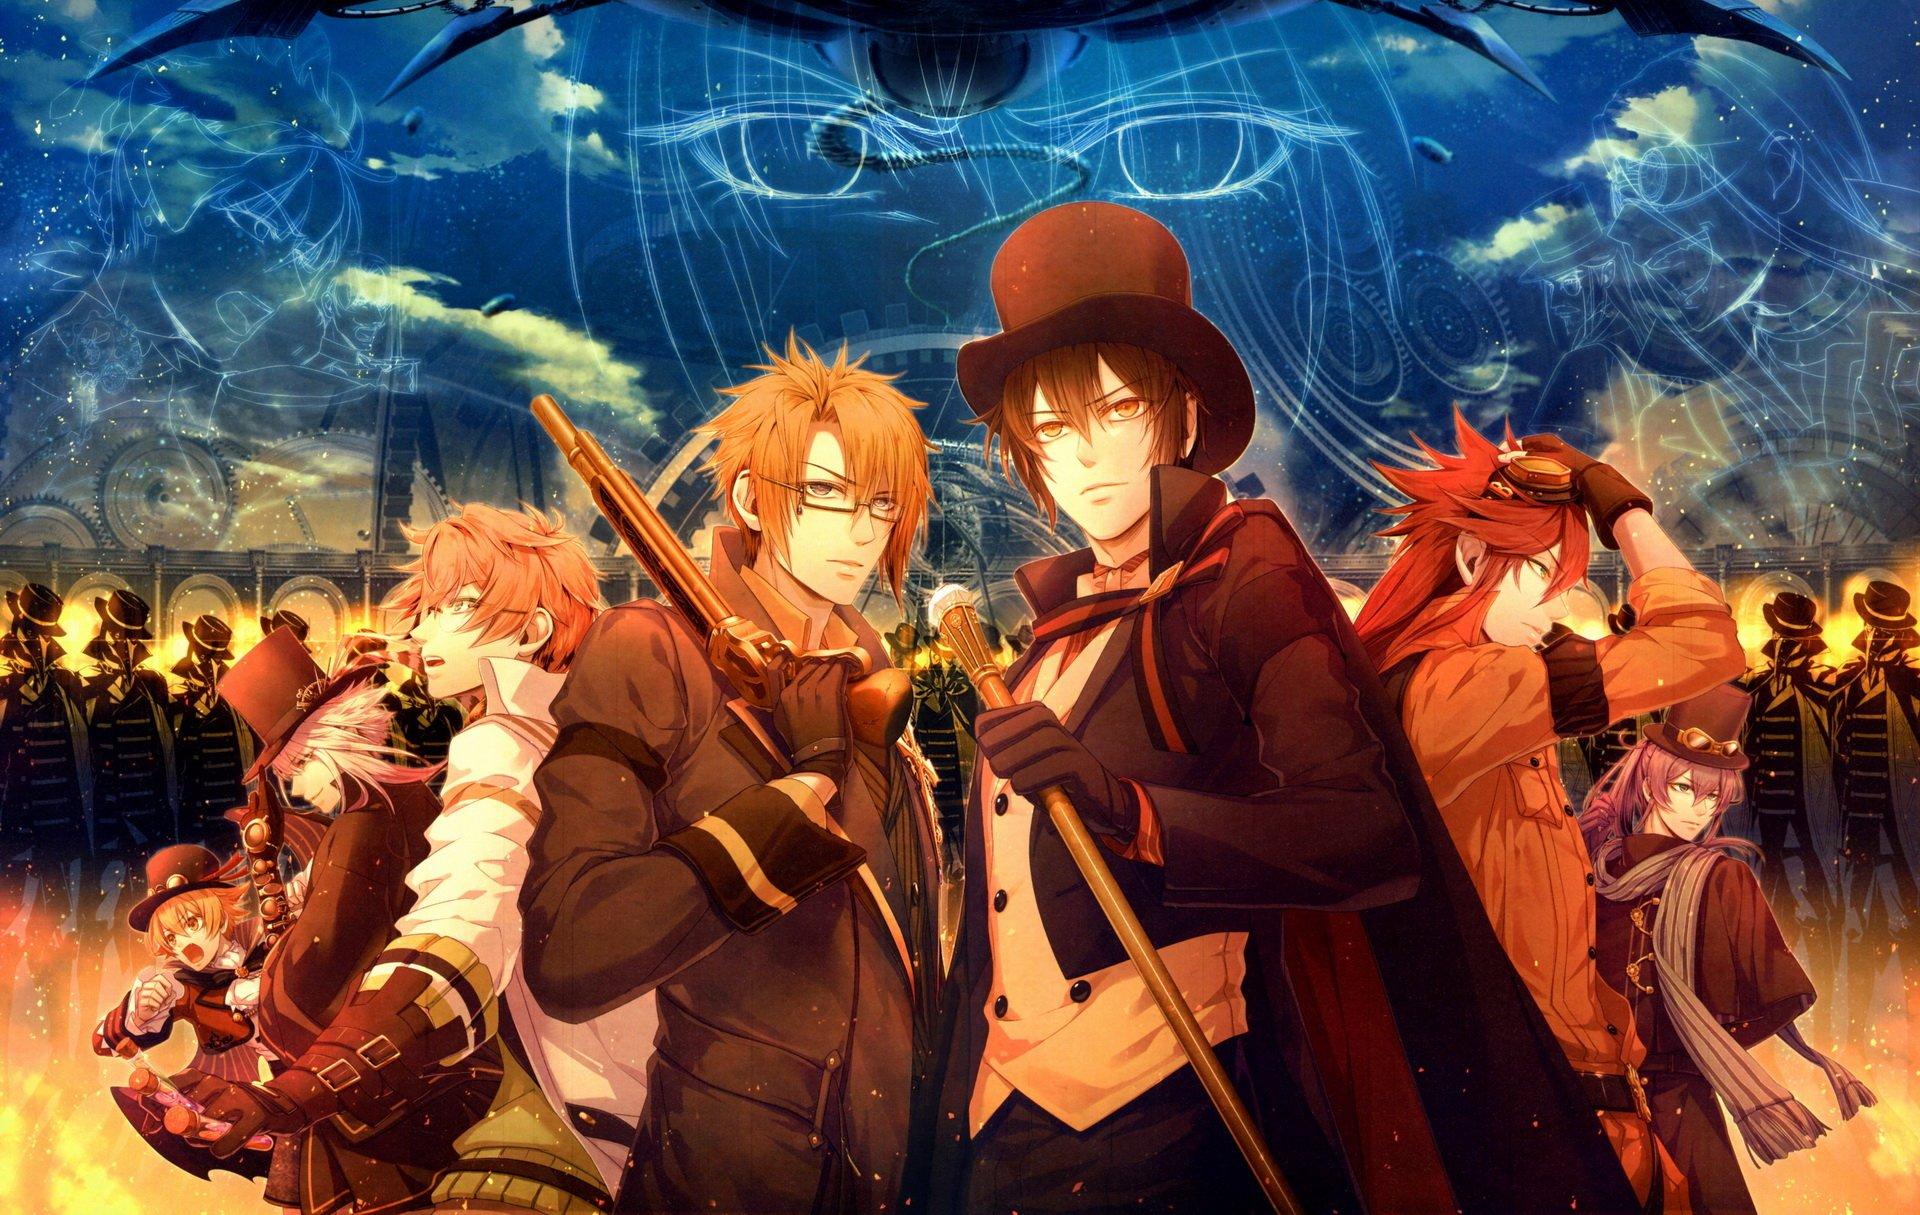 Otome Game Review: Code: Realize Guardian of Rebirth. Leaf